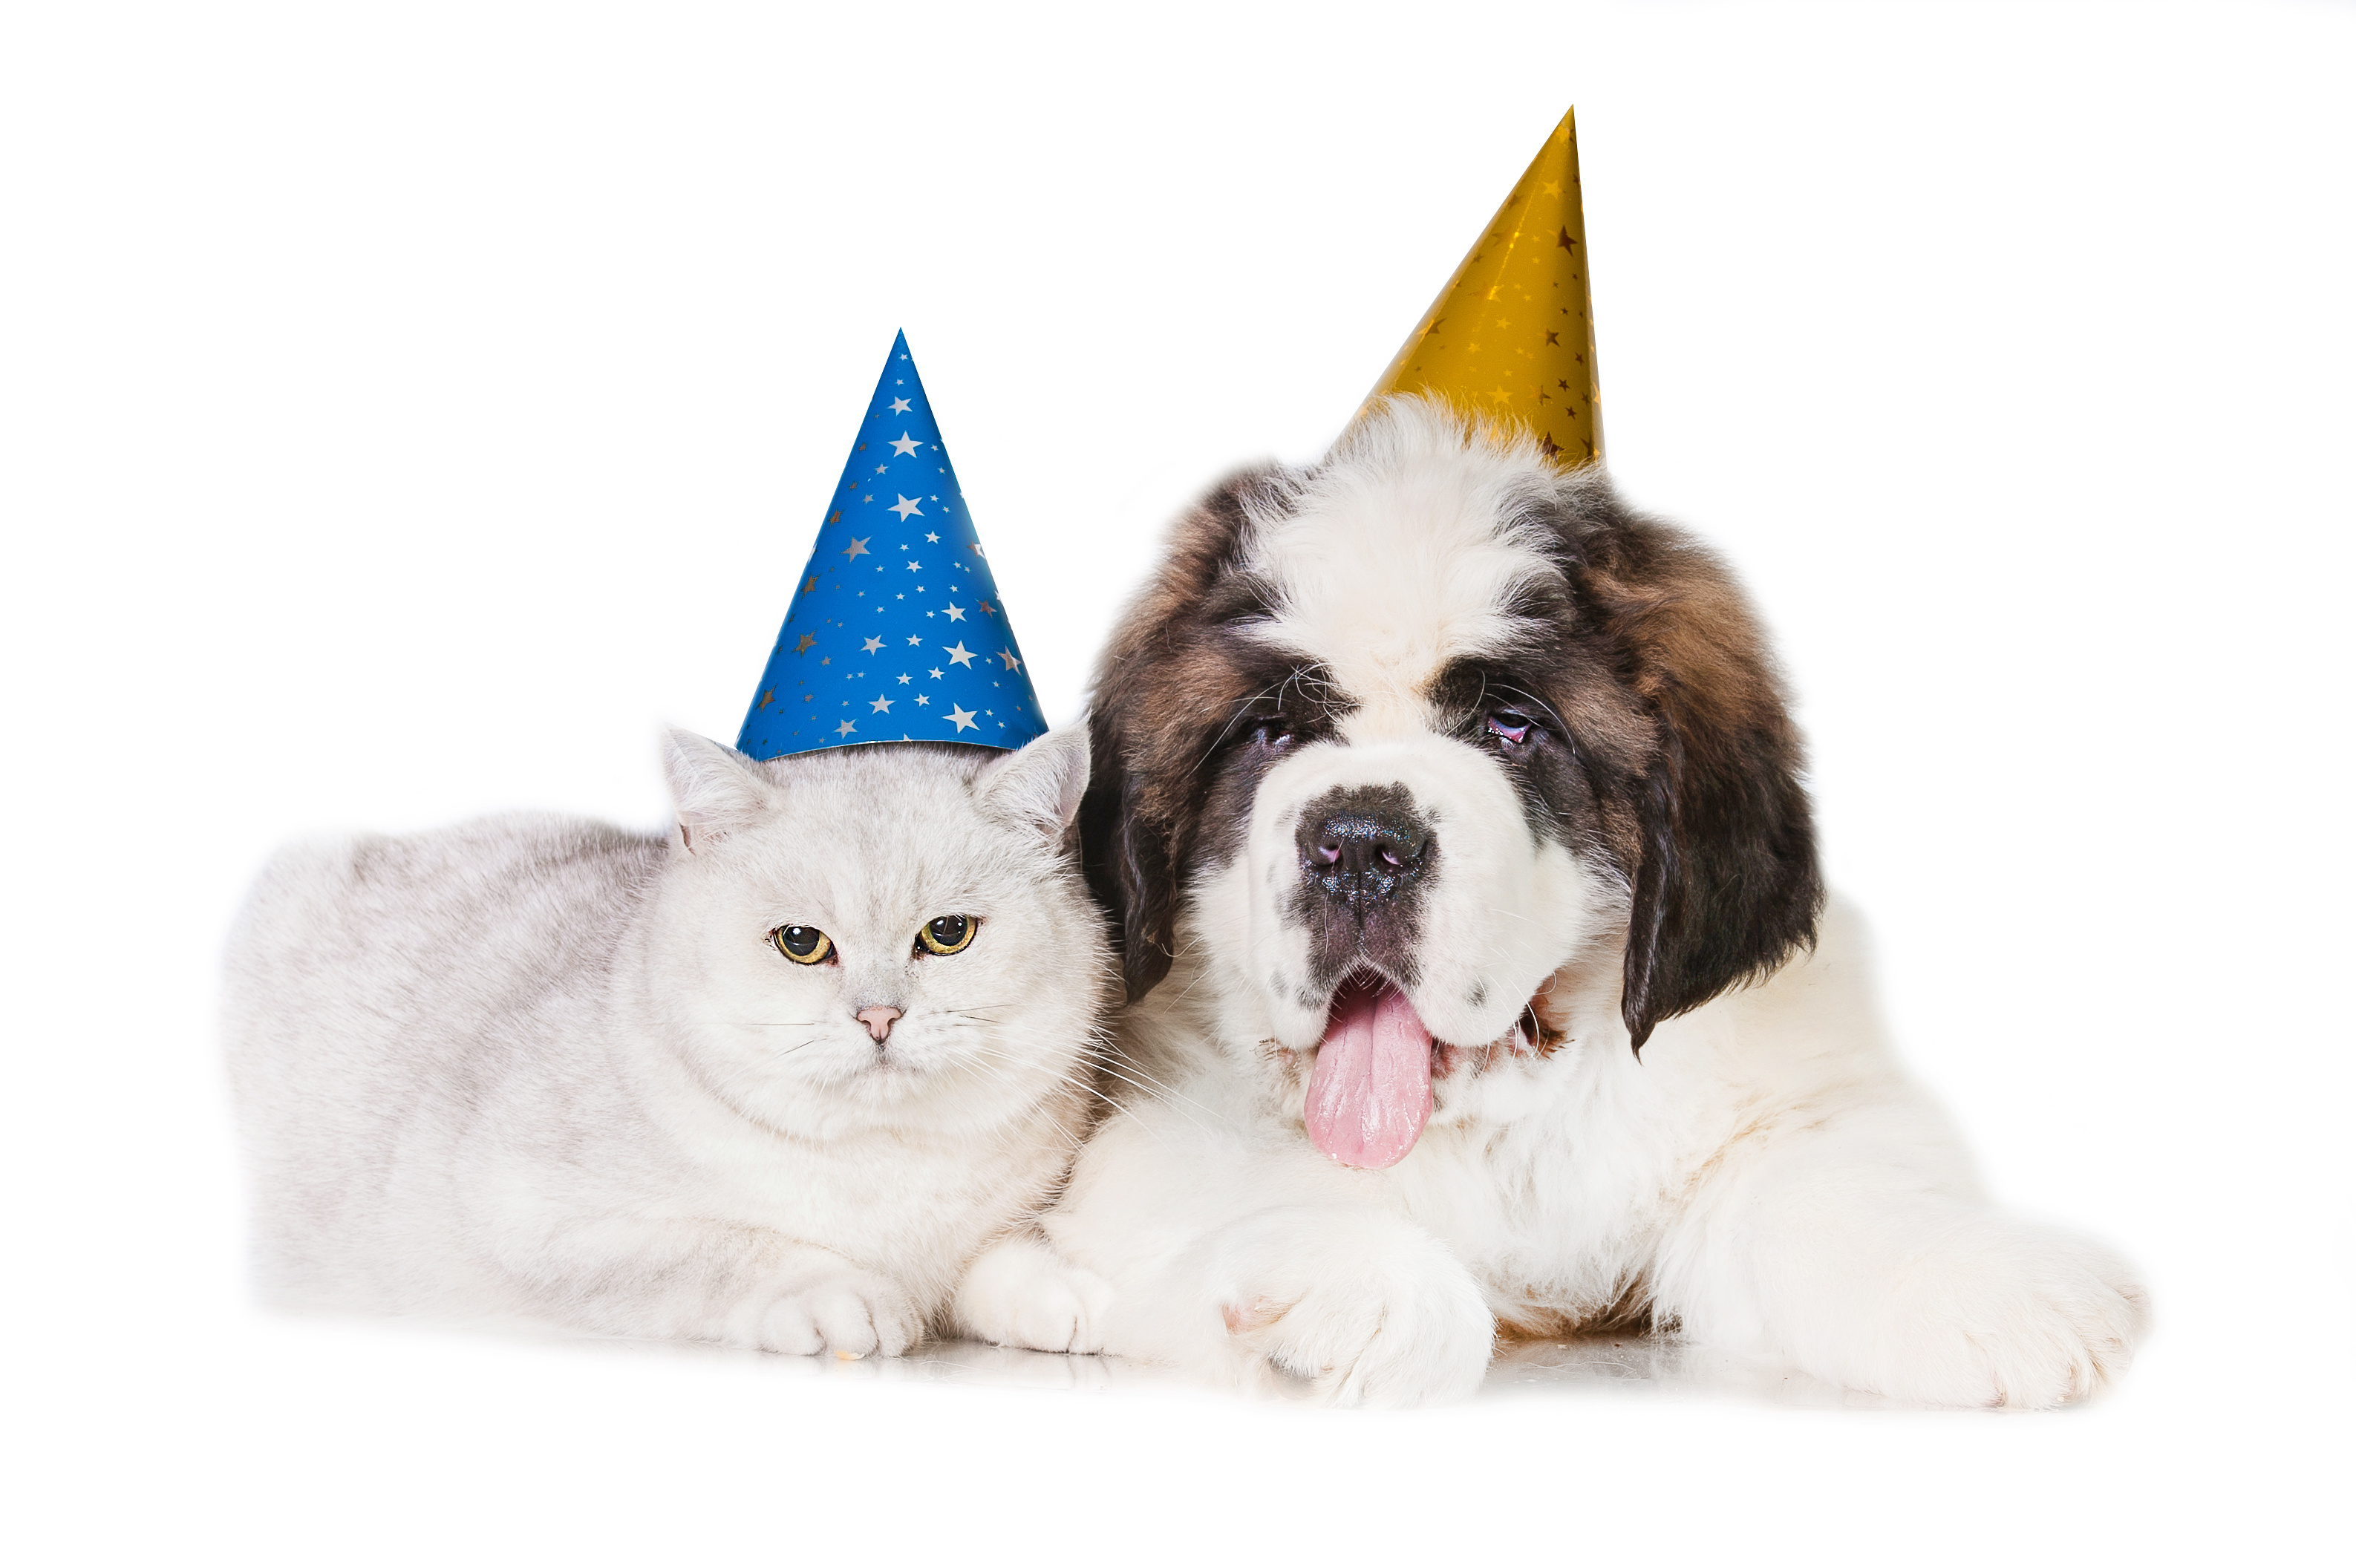 A cat and dog with party hats on.